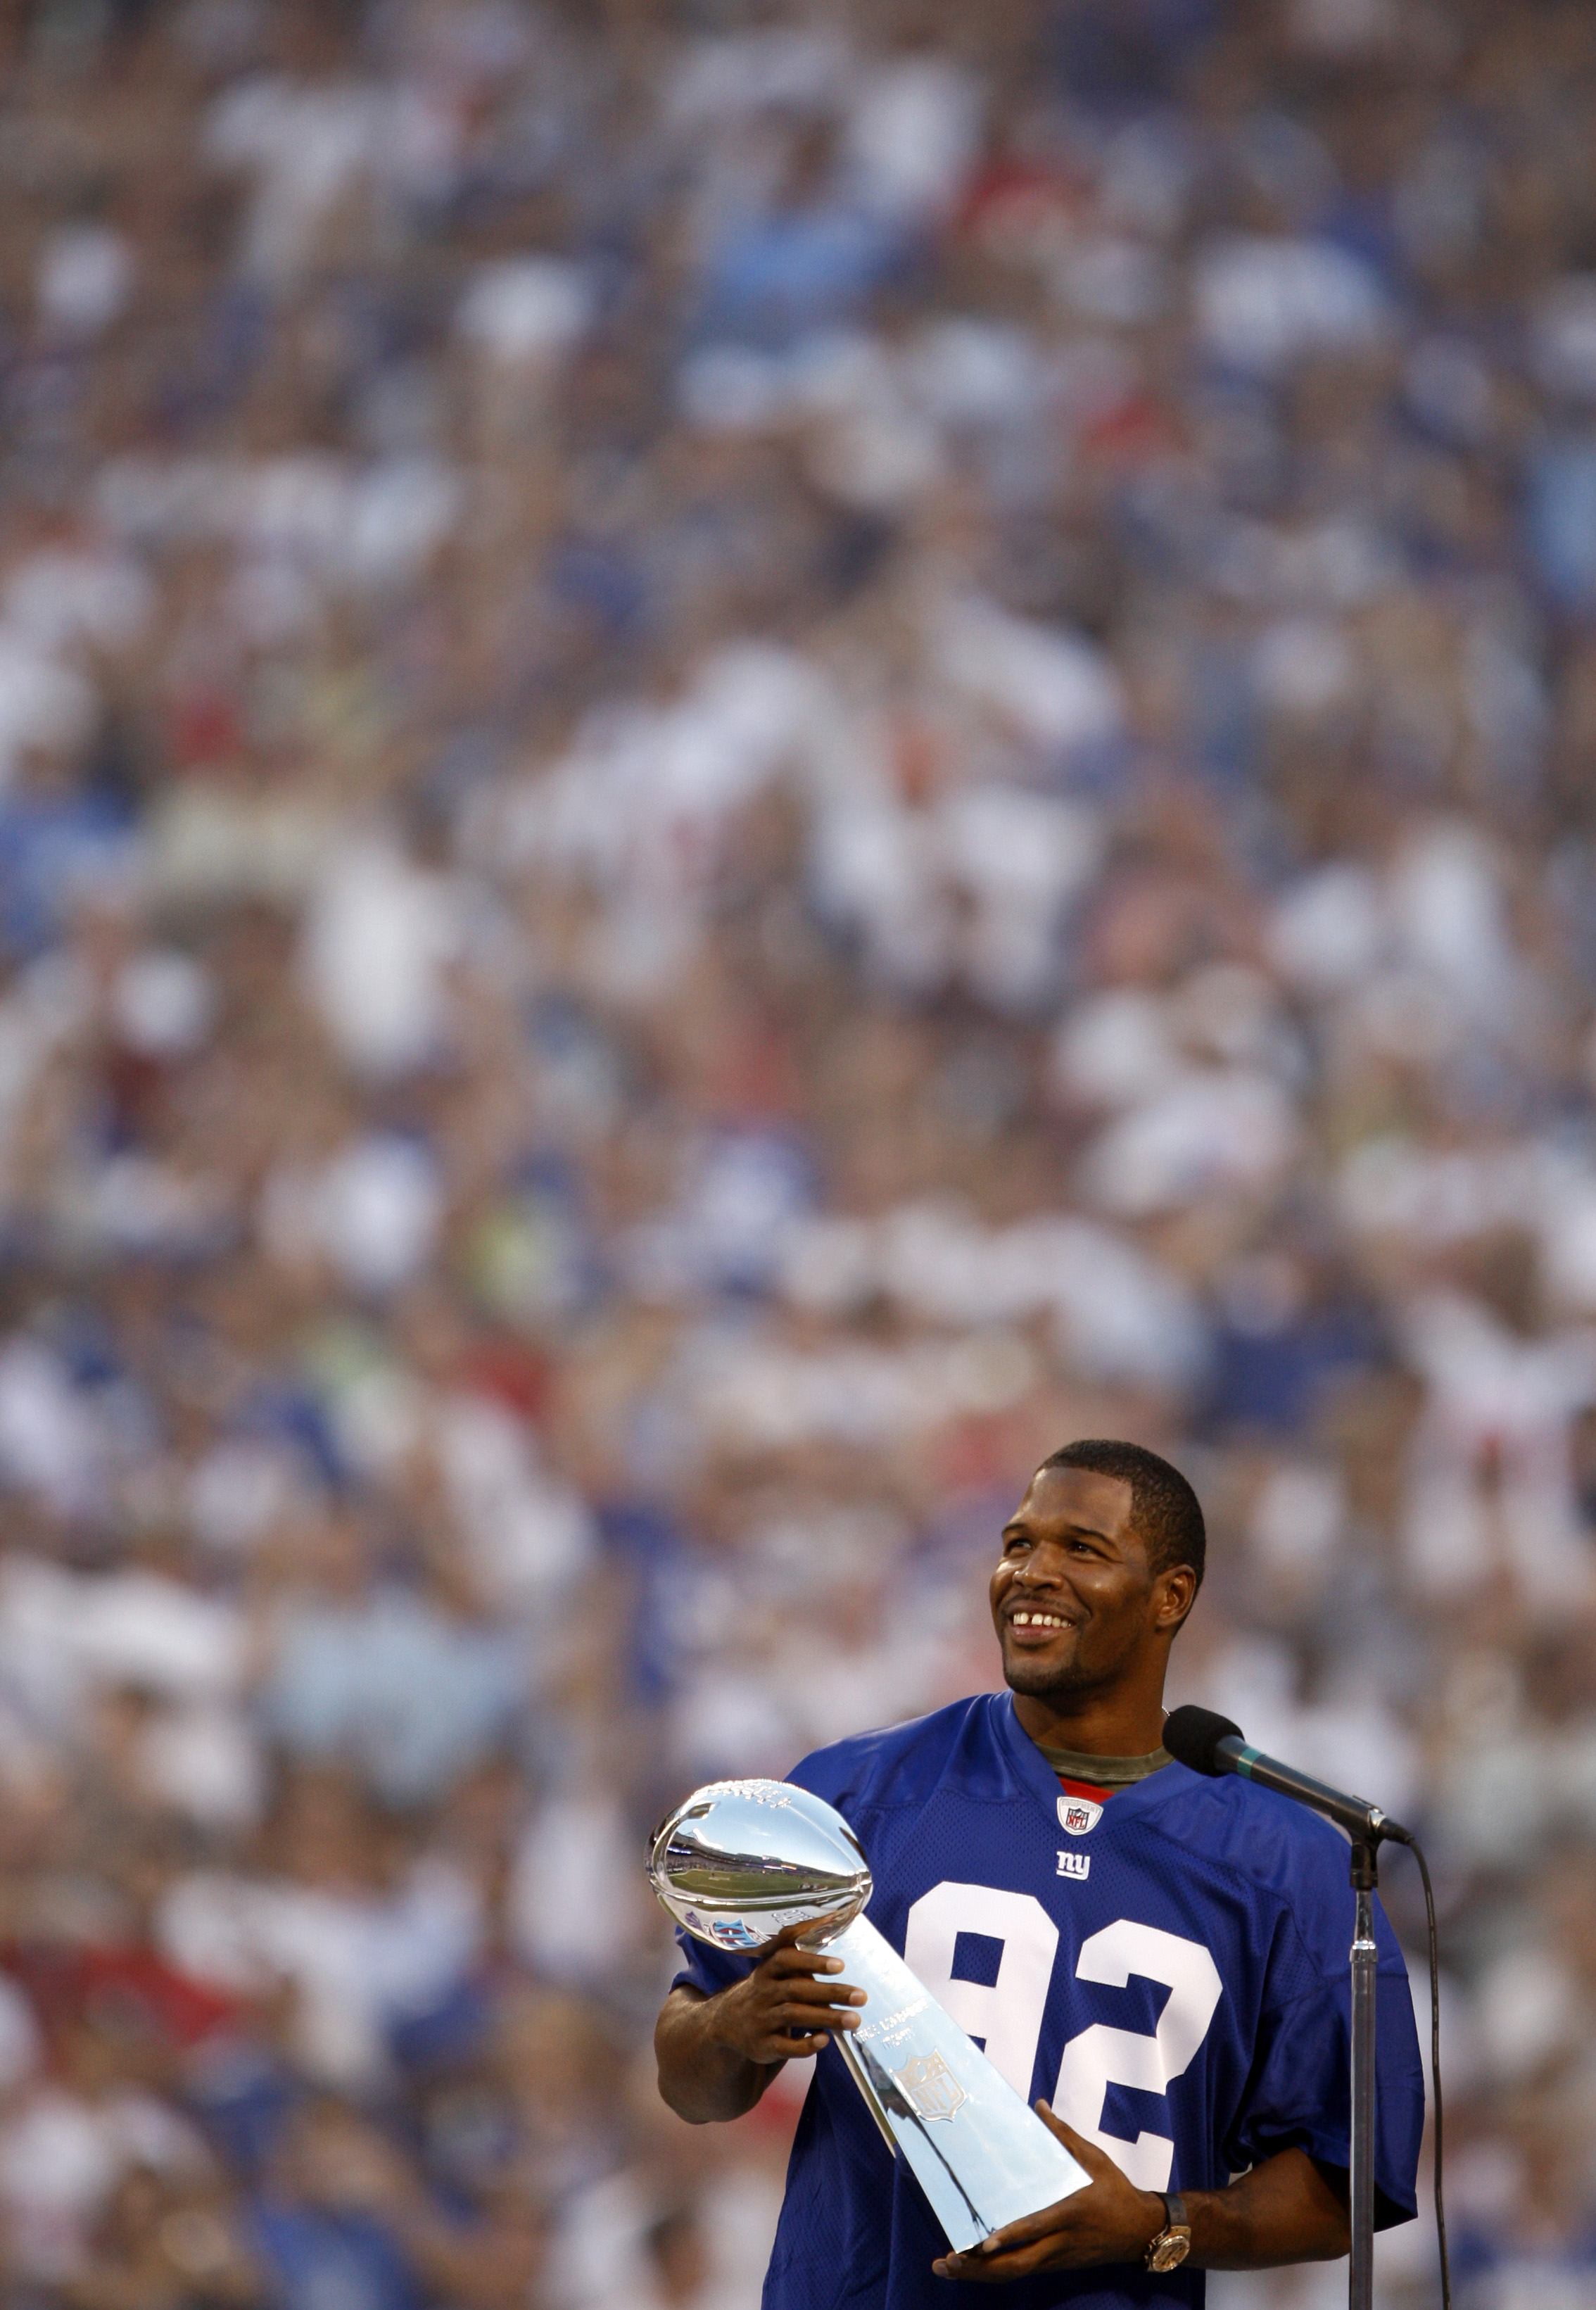 Michael Strahan with the Vince Lombardi Trophy during pregame Super Bowl celebration as the New York Giants host the Washington Redskins in the NFL 2008 season opener at Giants Stadium. EAST RUTHERFORD, NJ  (2008 file photo by Andrew Mills | The Star-Ledger)